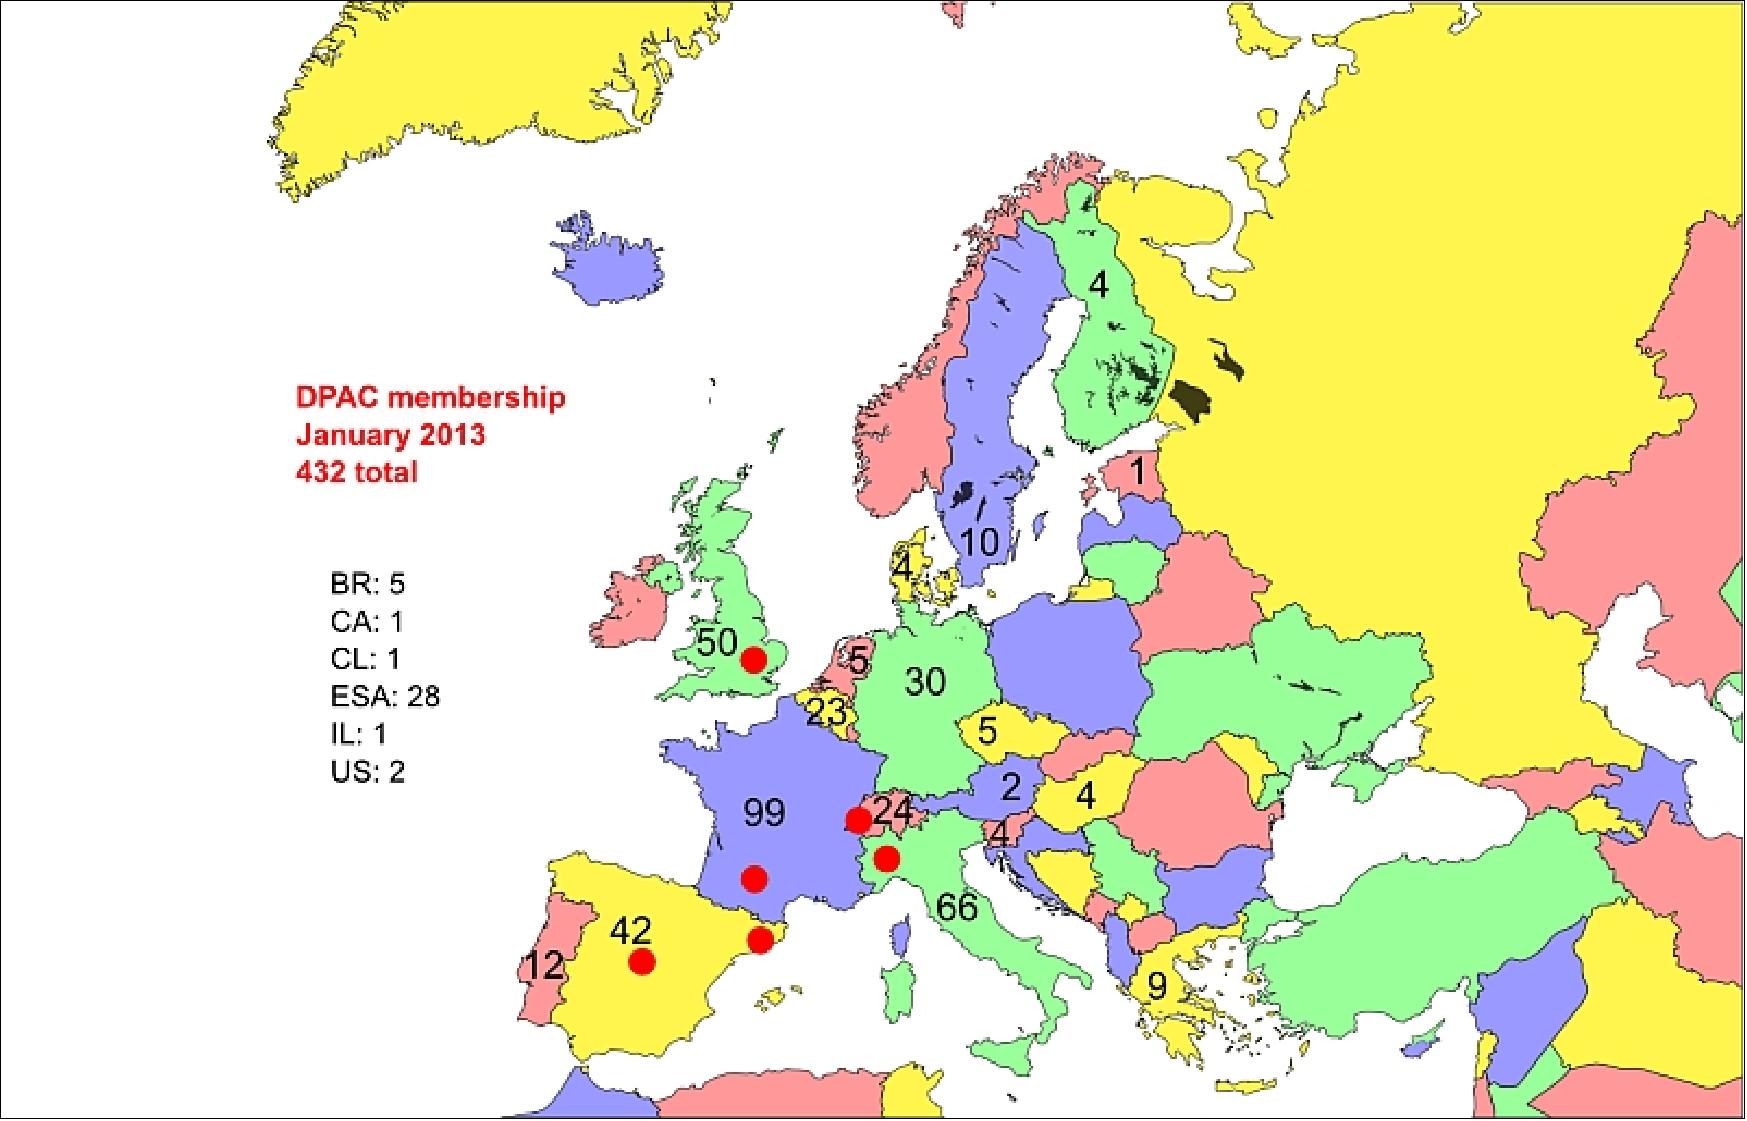 Figure 93: The DPAC membership map; the red dots indicate the locations of the DPCs (image credit: ESA)